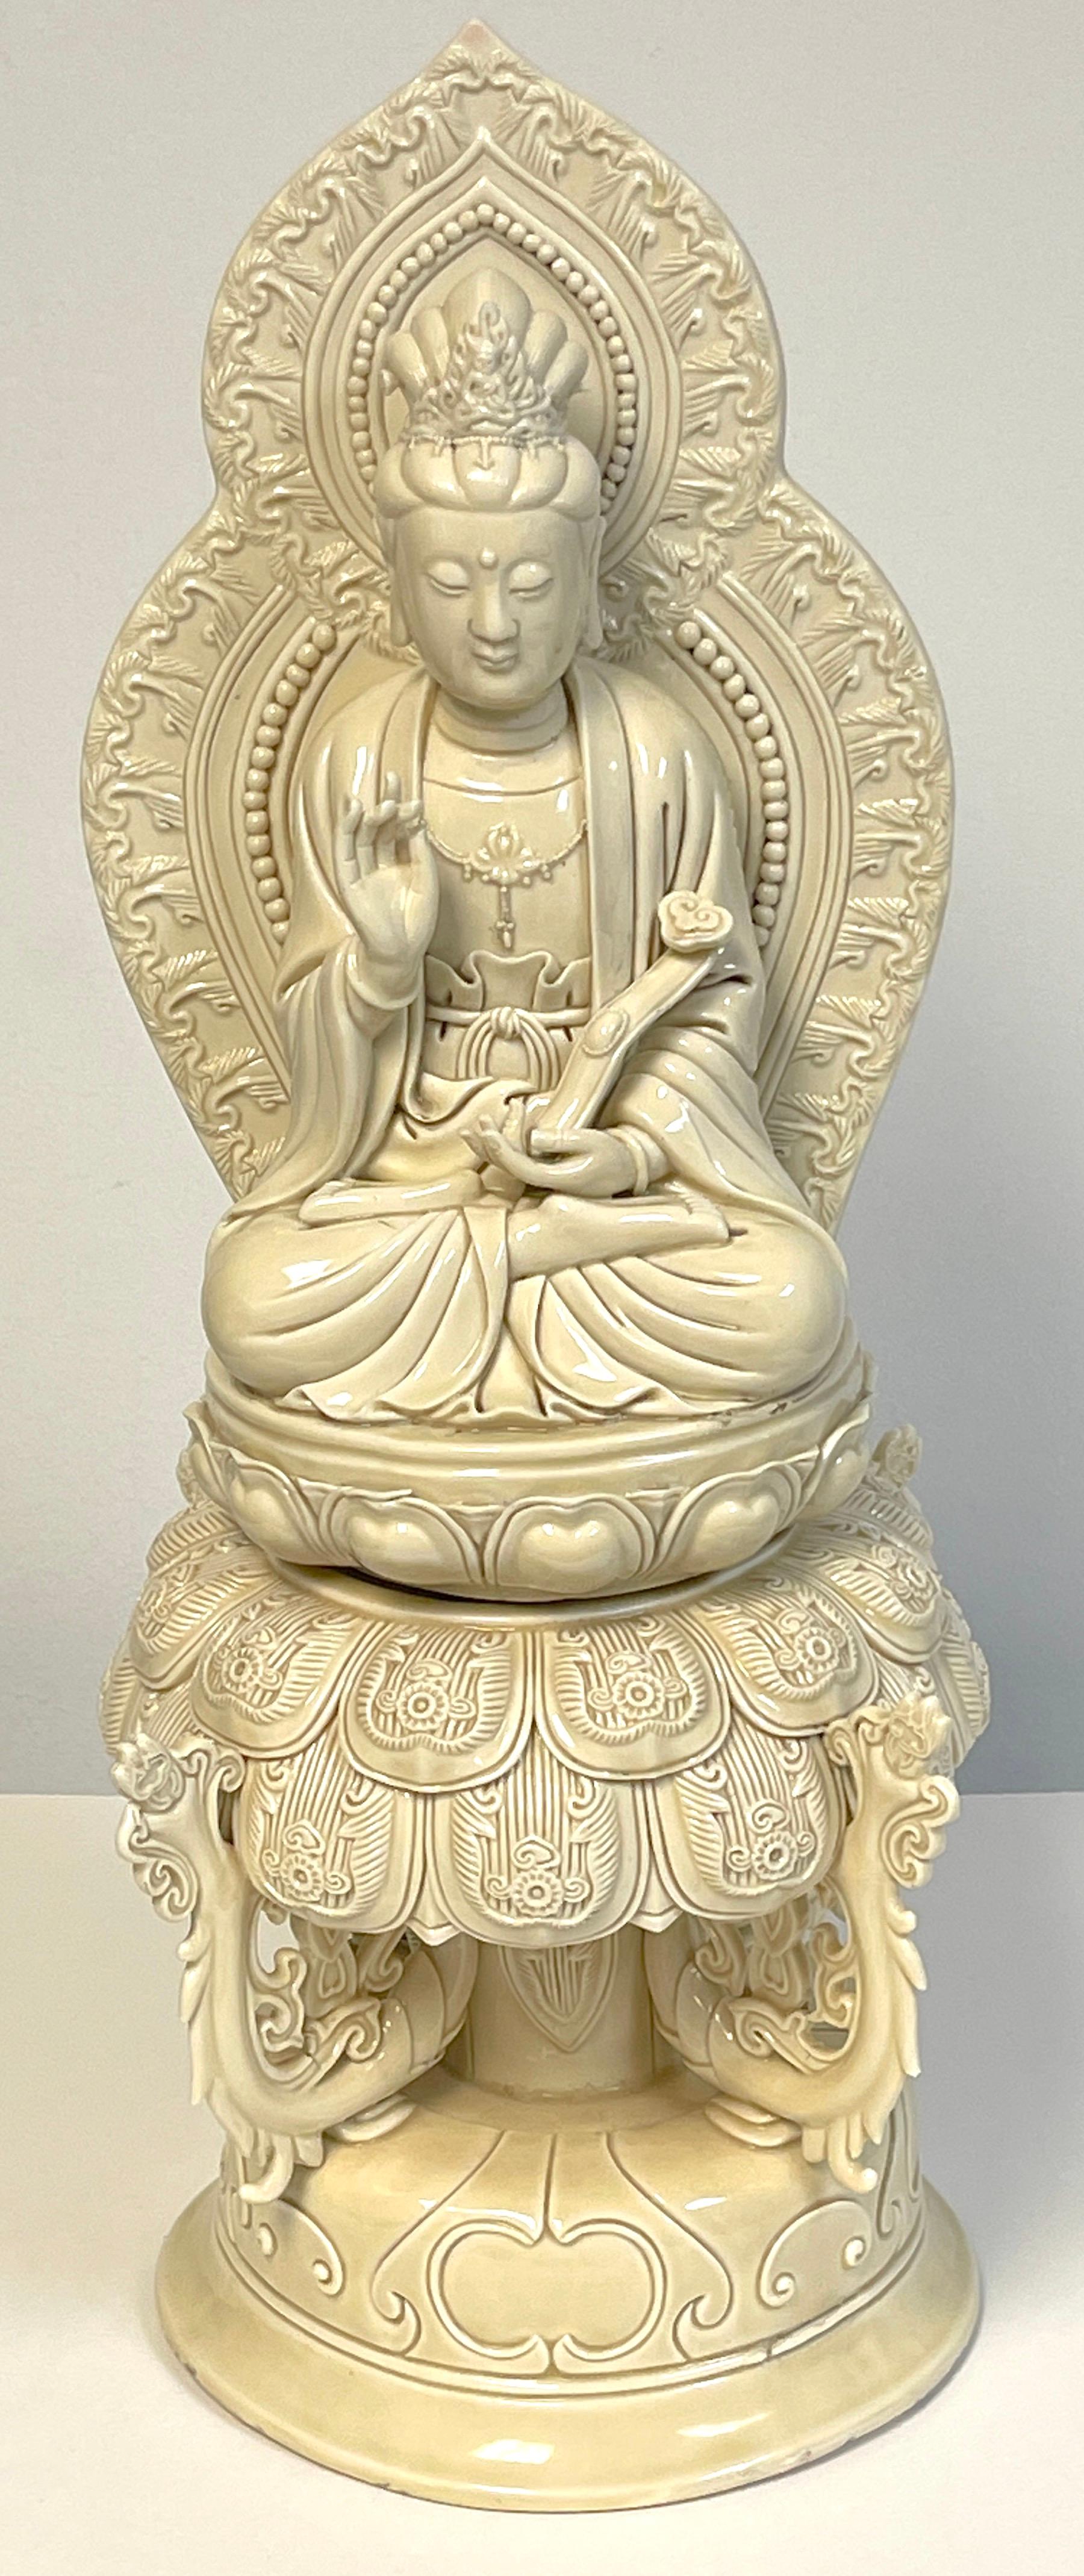 Chinese Blanc-de-Chine Seated Guanyin Altar Piece , 19th/20th Century

A large and impressive work, in two parts bearing seal/reign mark on the back of the mandala.

The serene bodhisattva in front of a pagoda shaped mandala, wearing an ornate